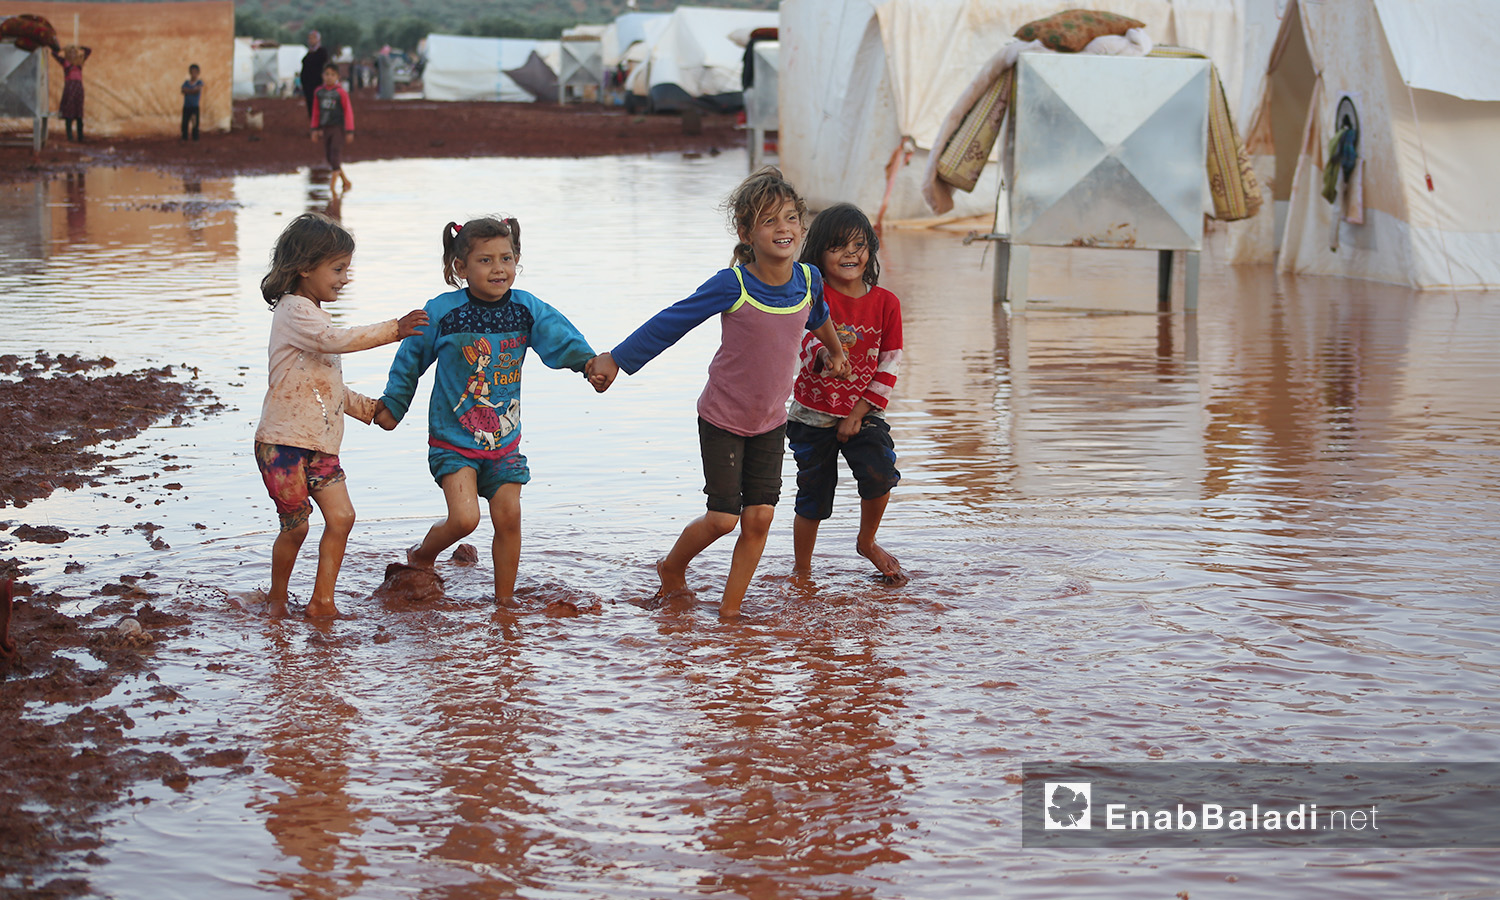 Children playing in the stormwater after the rainstorm that hit “Sahl al-Khair” camp for Syrian internally displaced people (IDPs) near Kafr Bunni in northern Idlib countryside – 19 June 2020  (Enab Baladi / Yousef Ghuraibi)